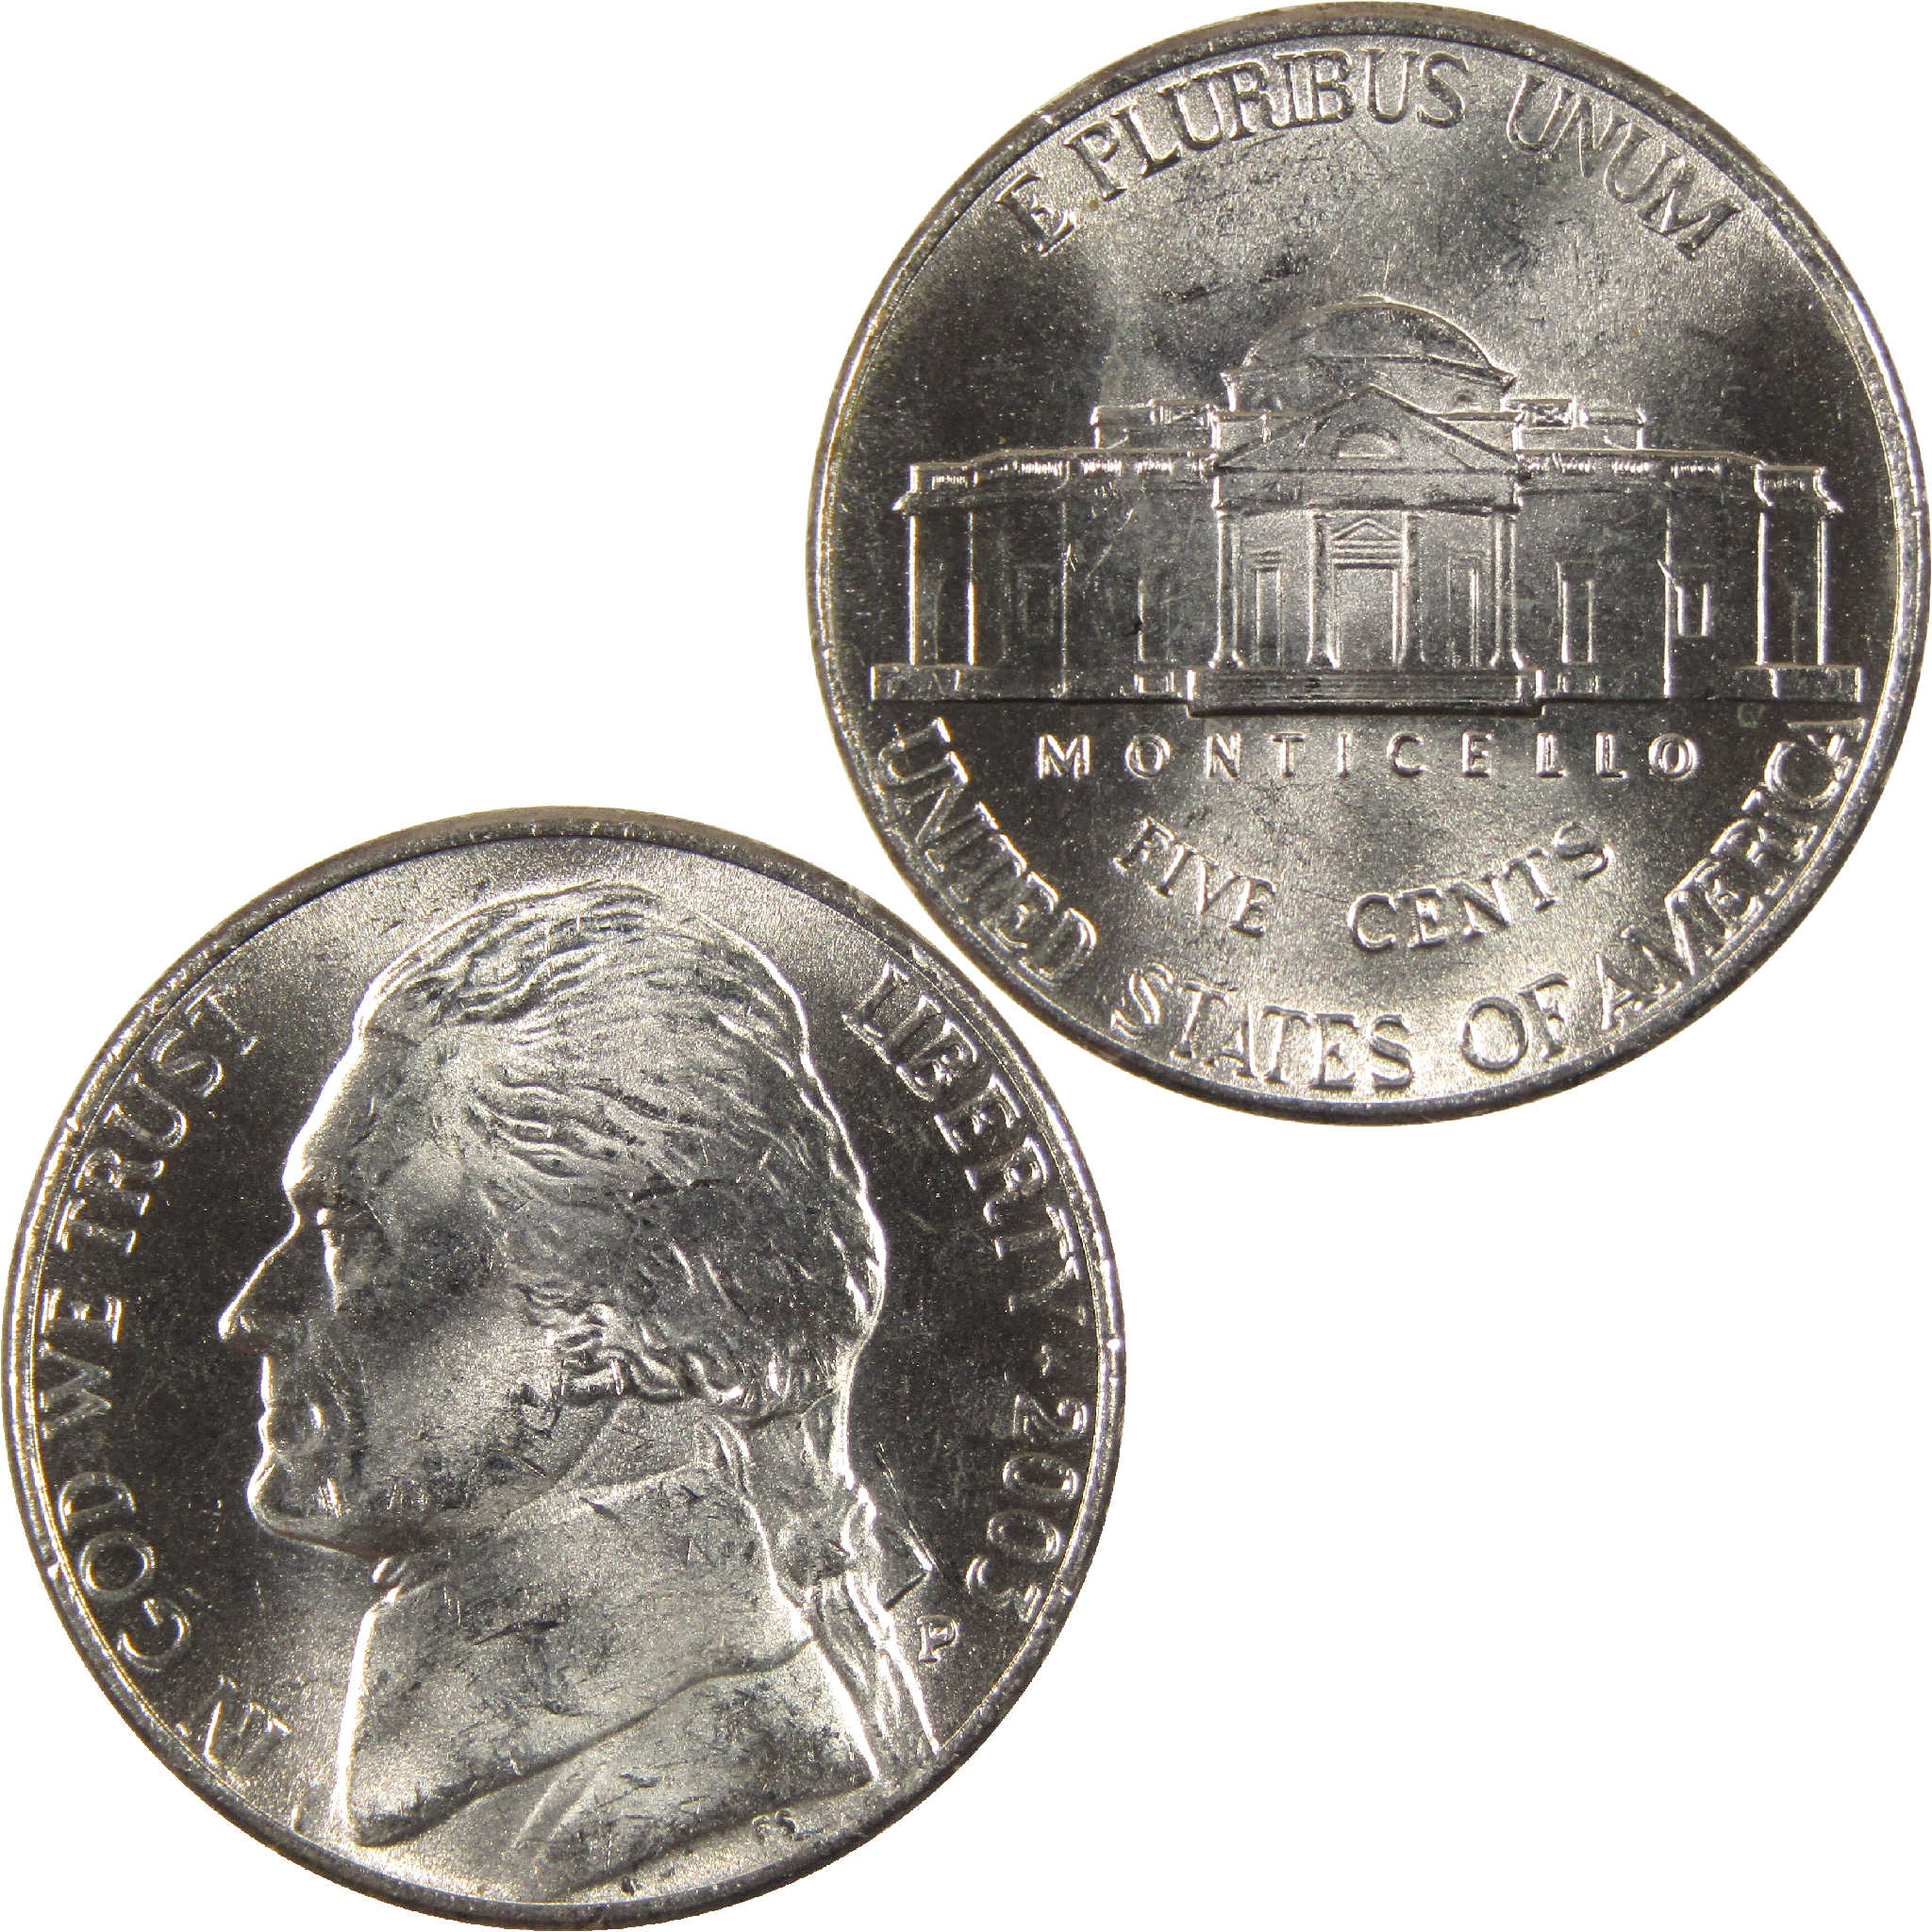 2003 P Jefferson Nickel Uncirculated 5c Coin